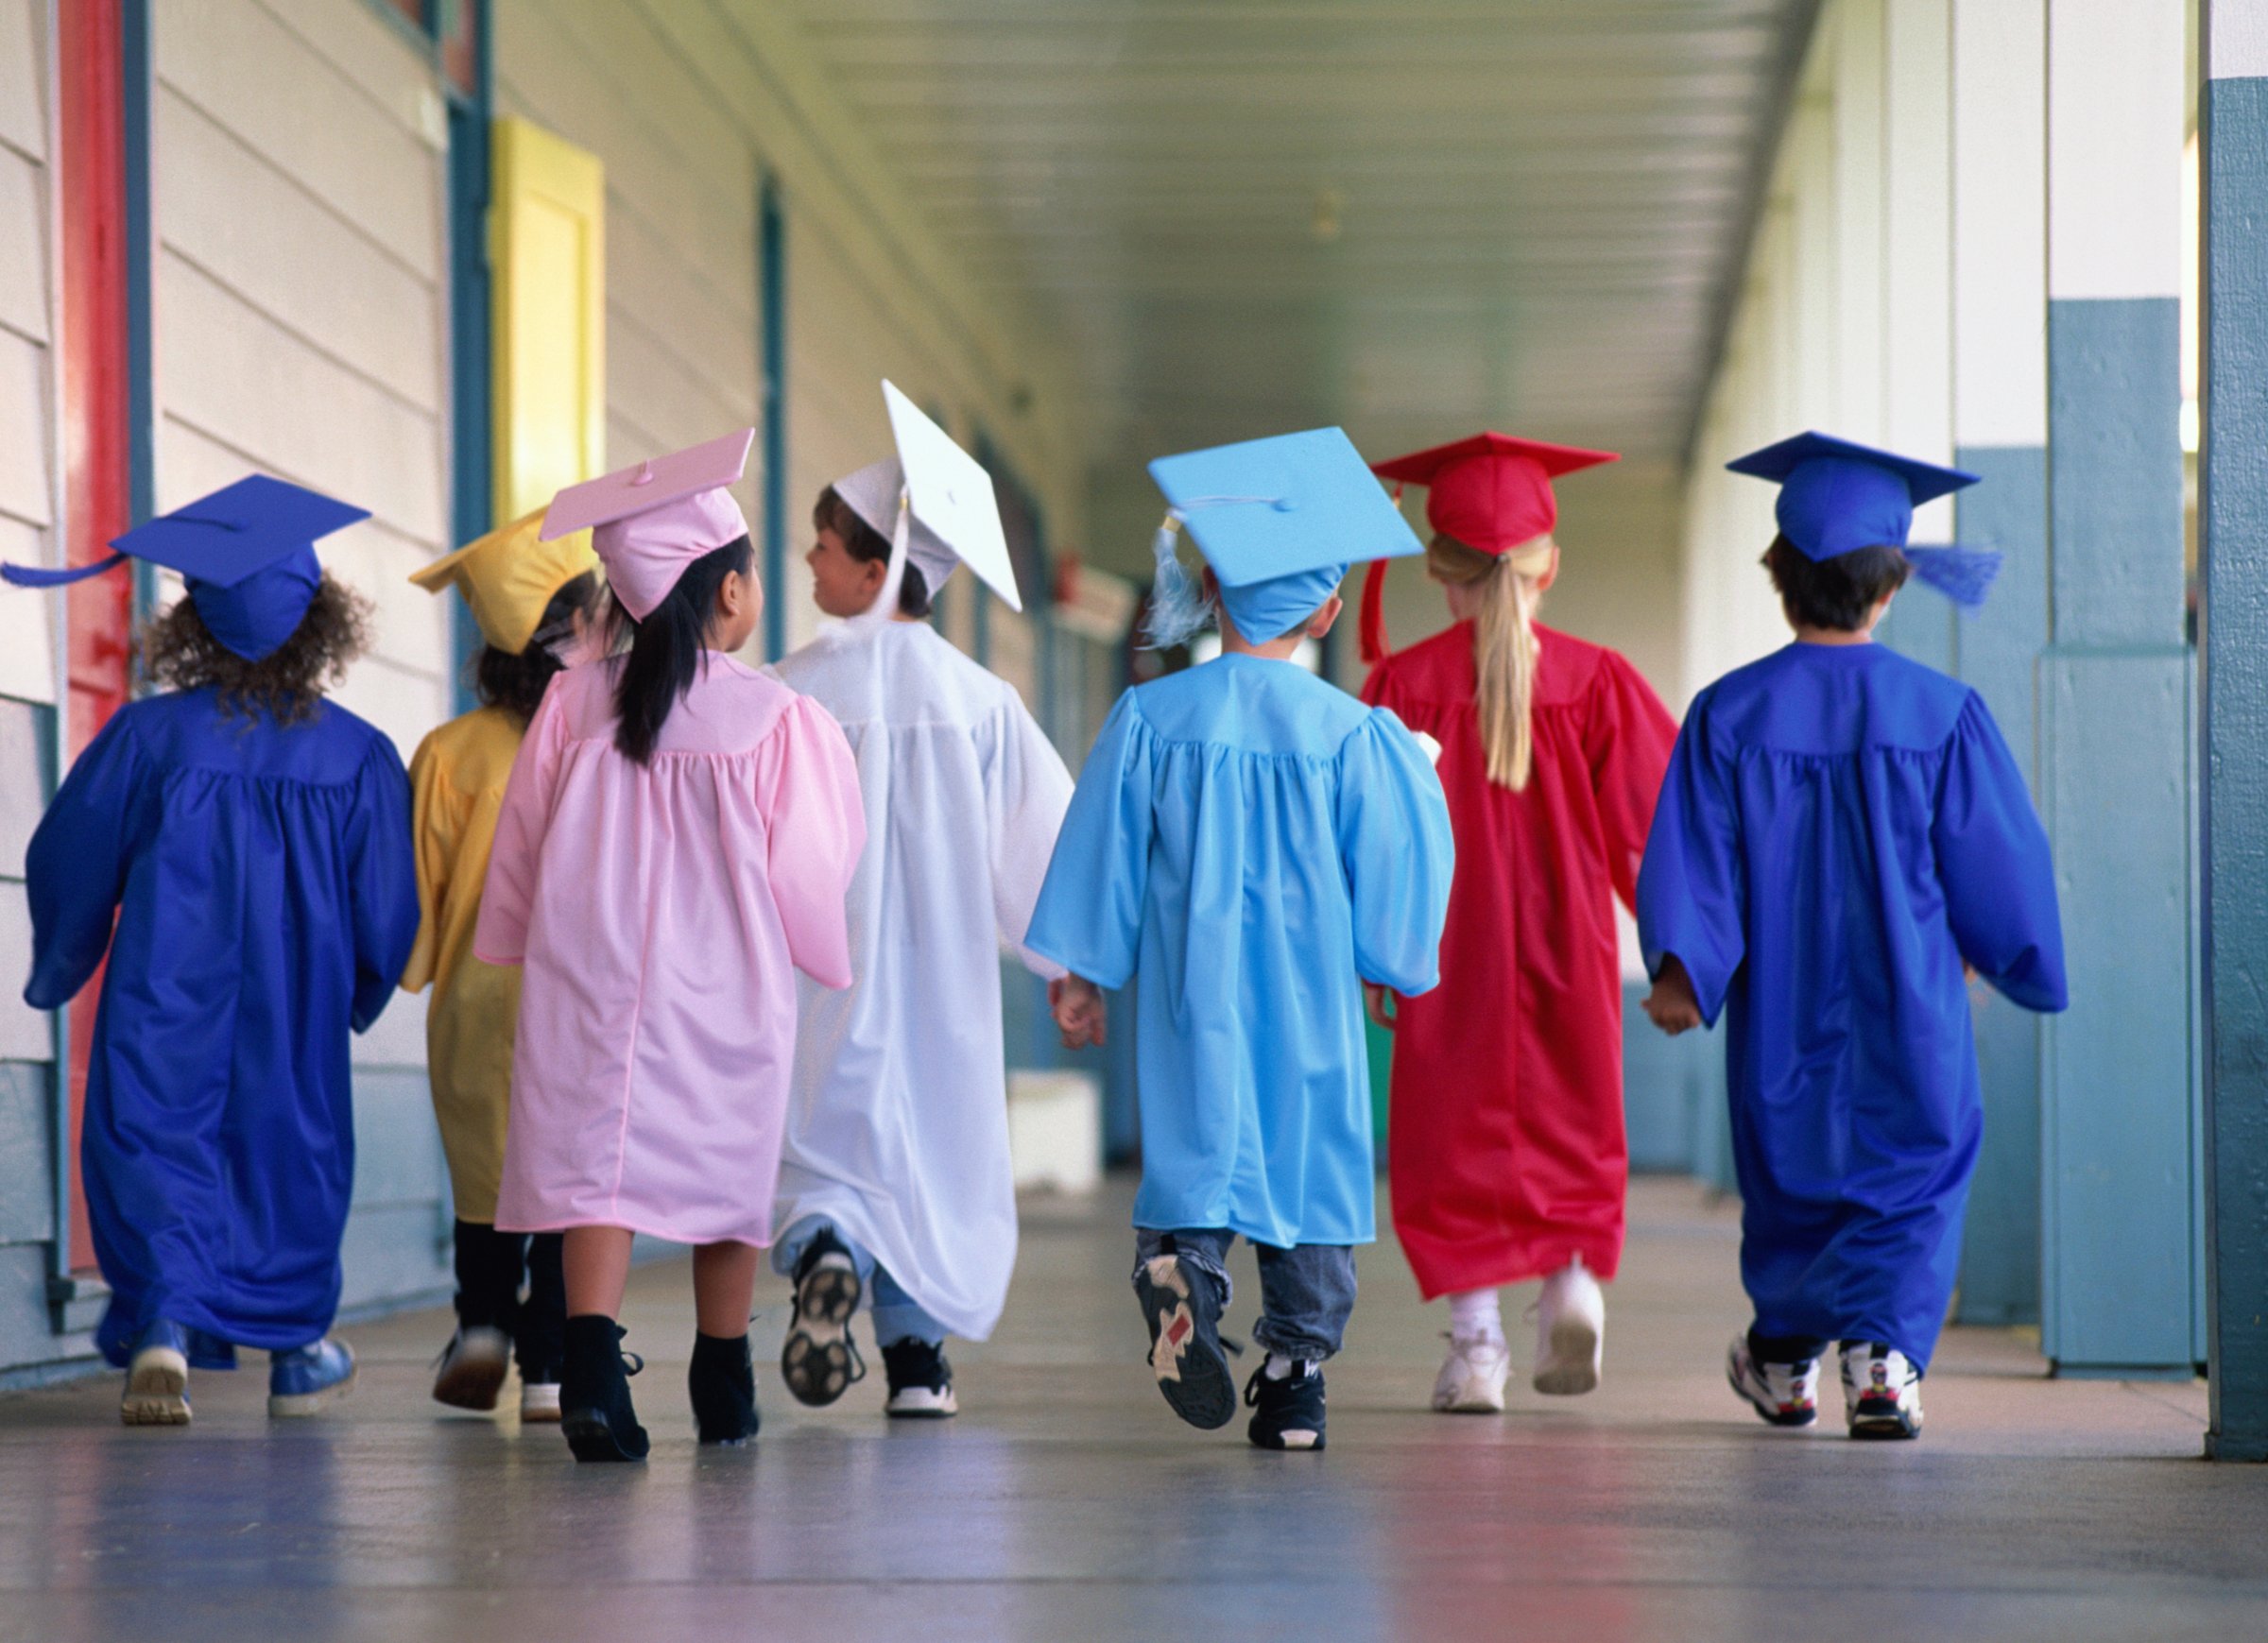 Group of children wearing graduation robes, rear view